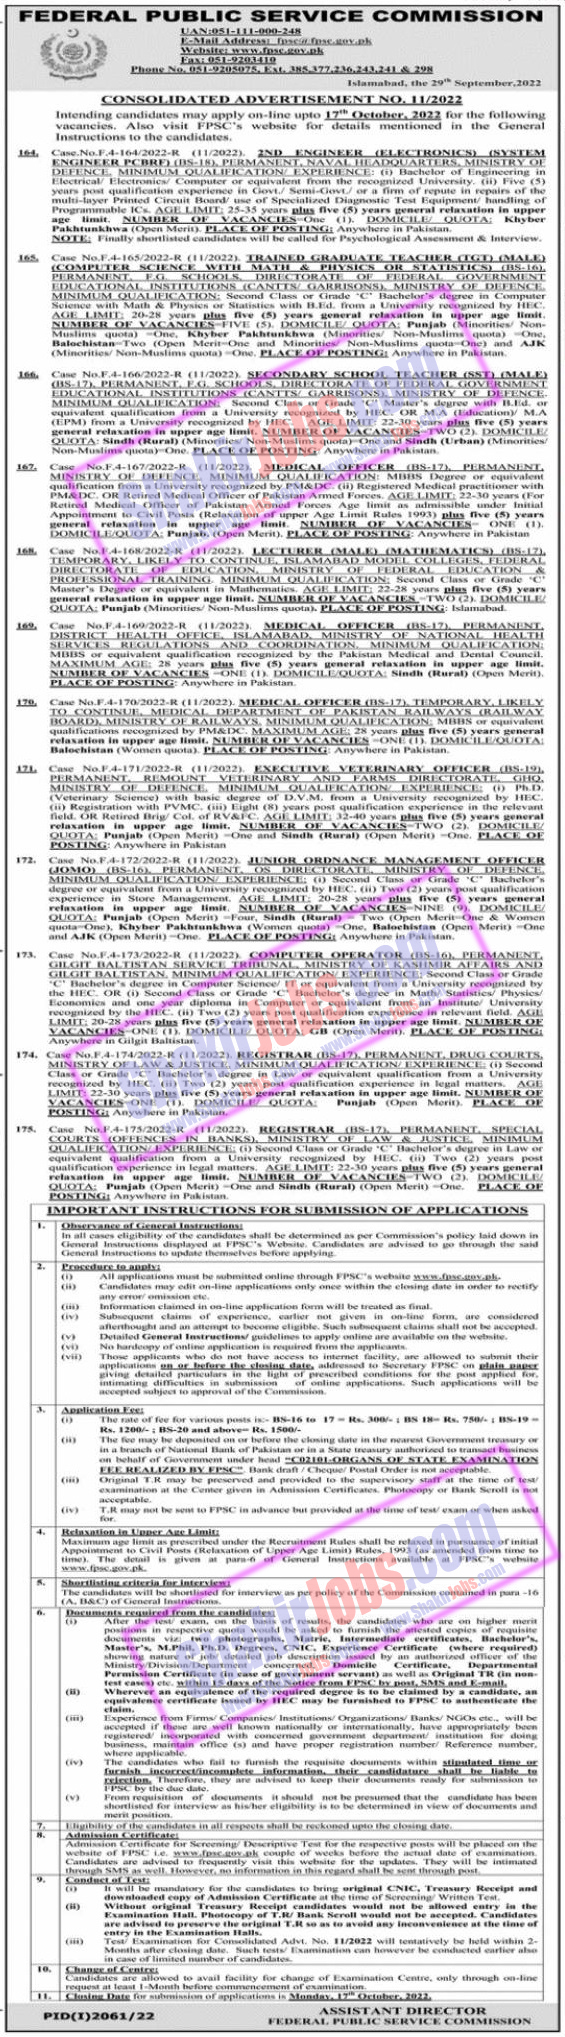 FPSC Jobs 2022 Consolidated Advertisement No 11 2022